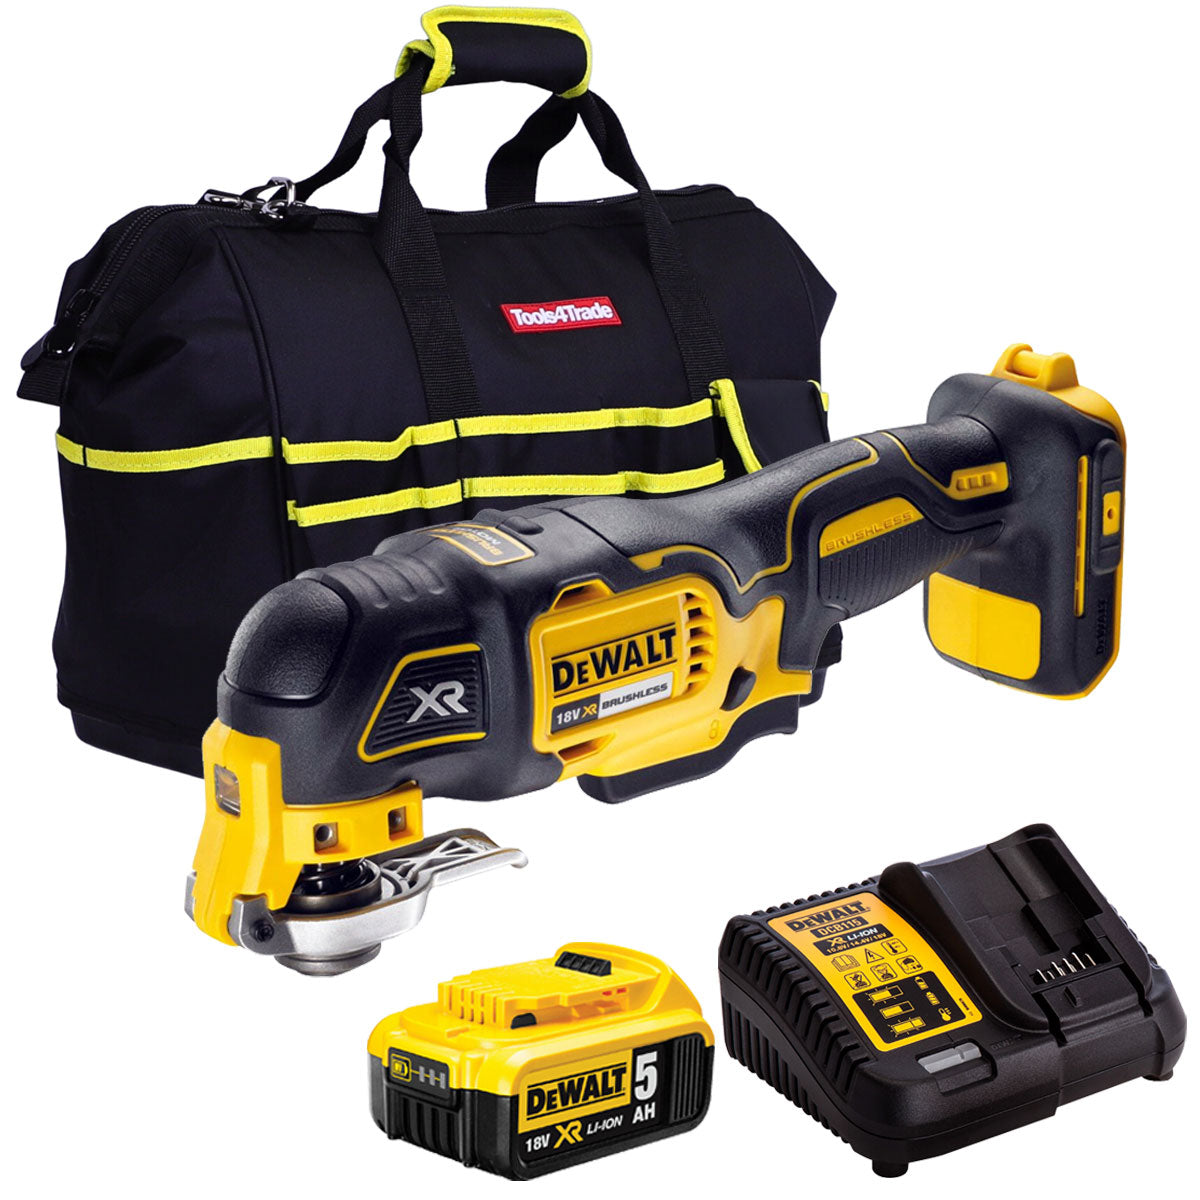 Dewalt DCS356N 18V Brushless Oscillating Multi-Tool with 1 x 5.0Ah Battery Charger & 18